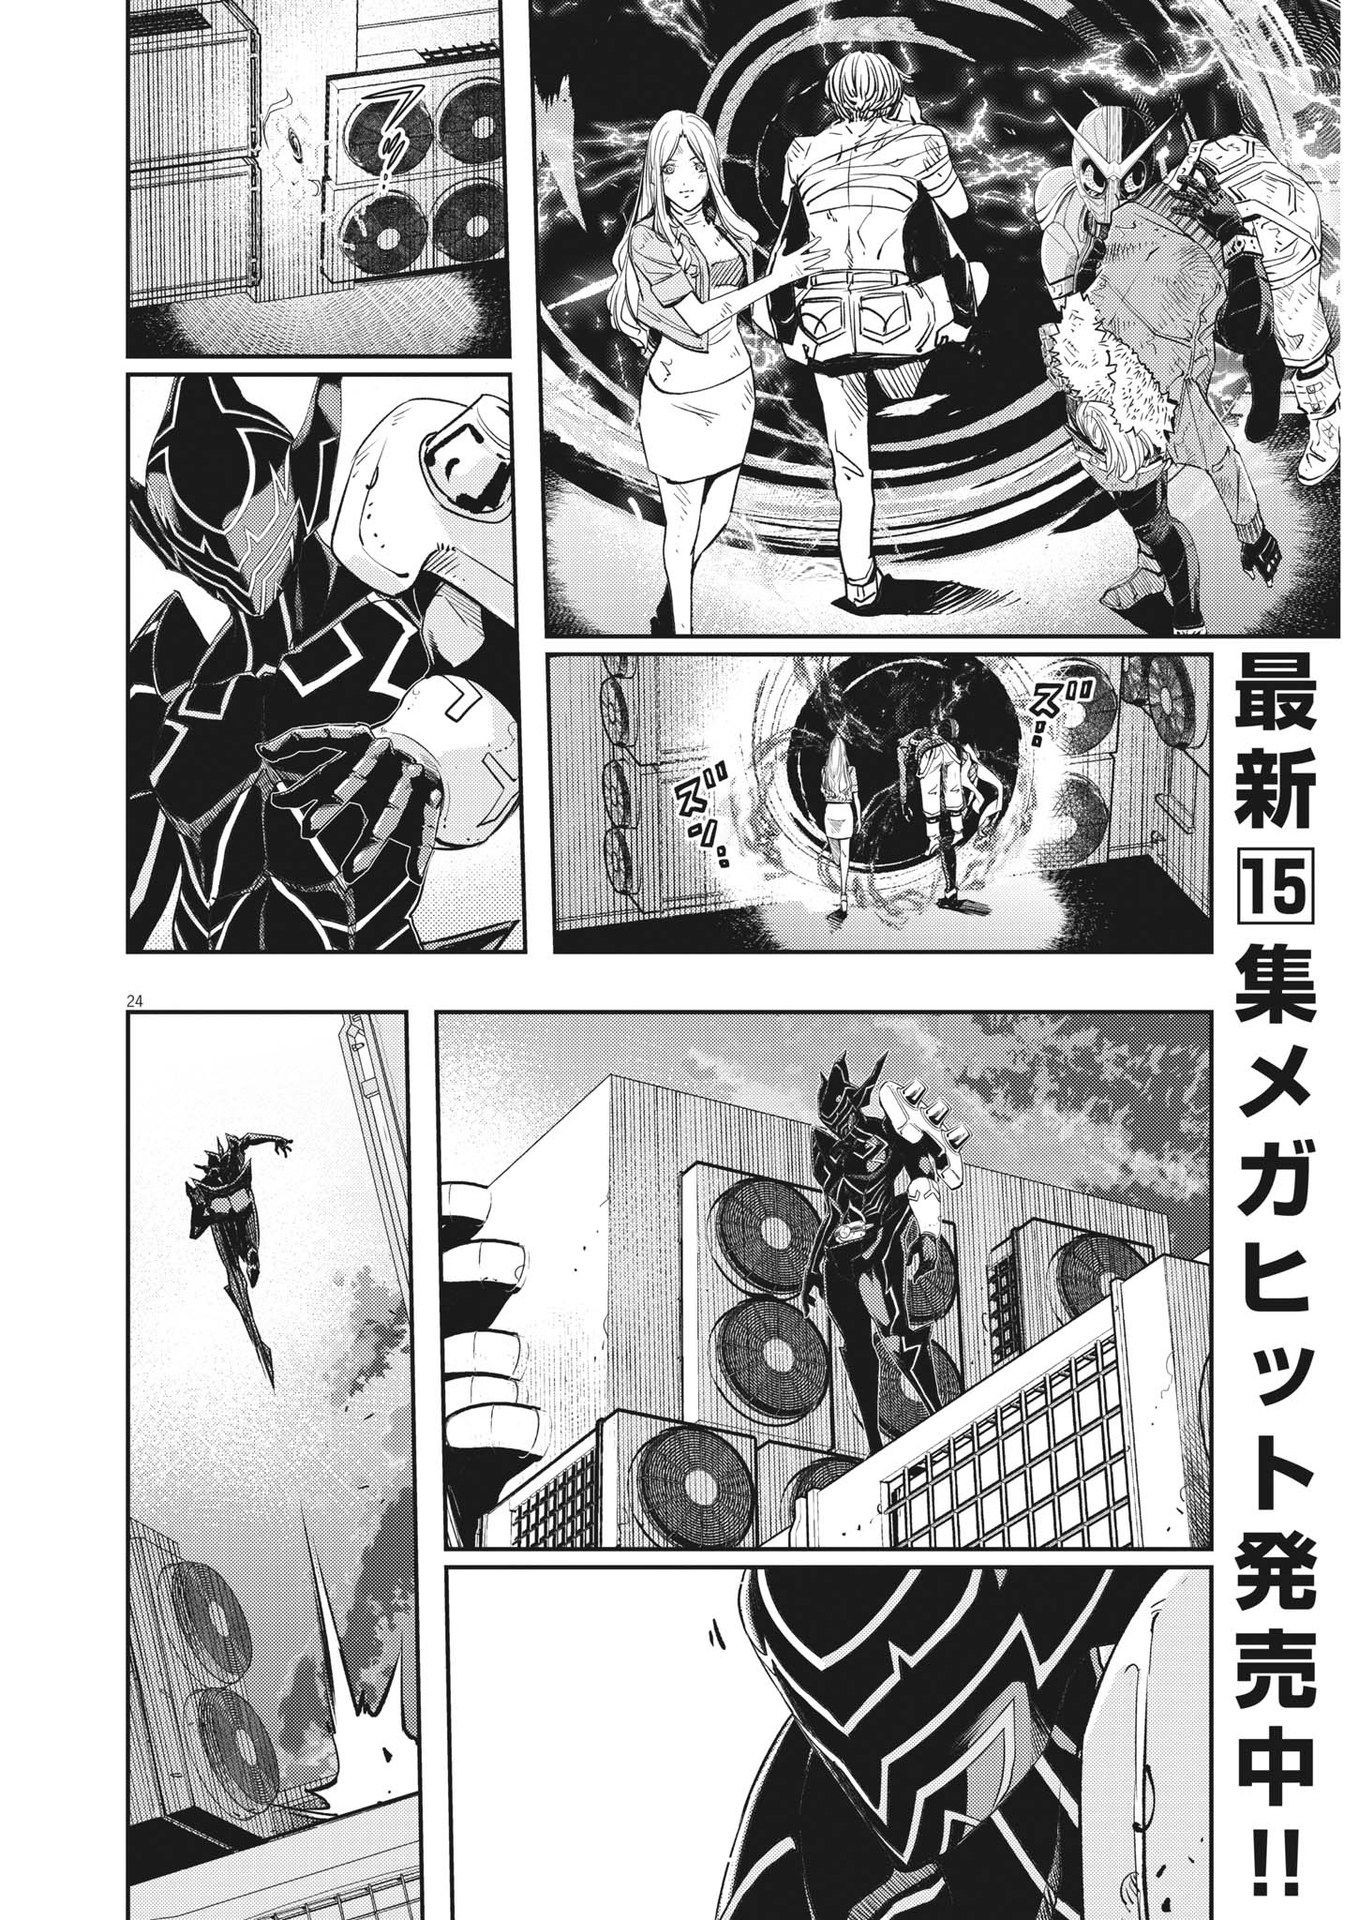 Kamen Rider W: Fuuto Tantei - Chapter 142 - Page 24